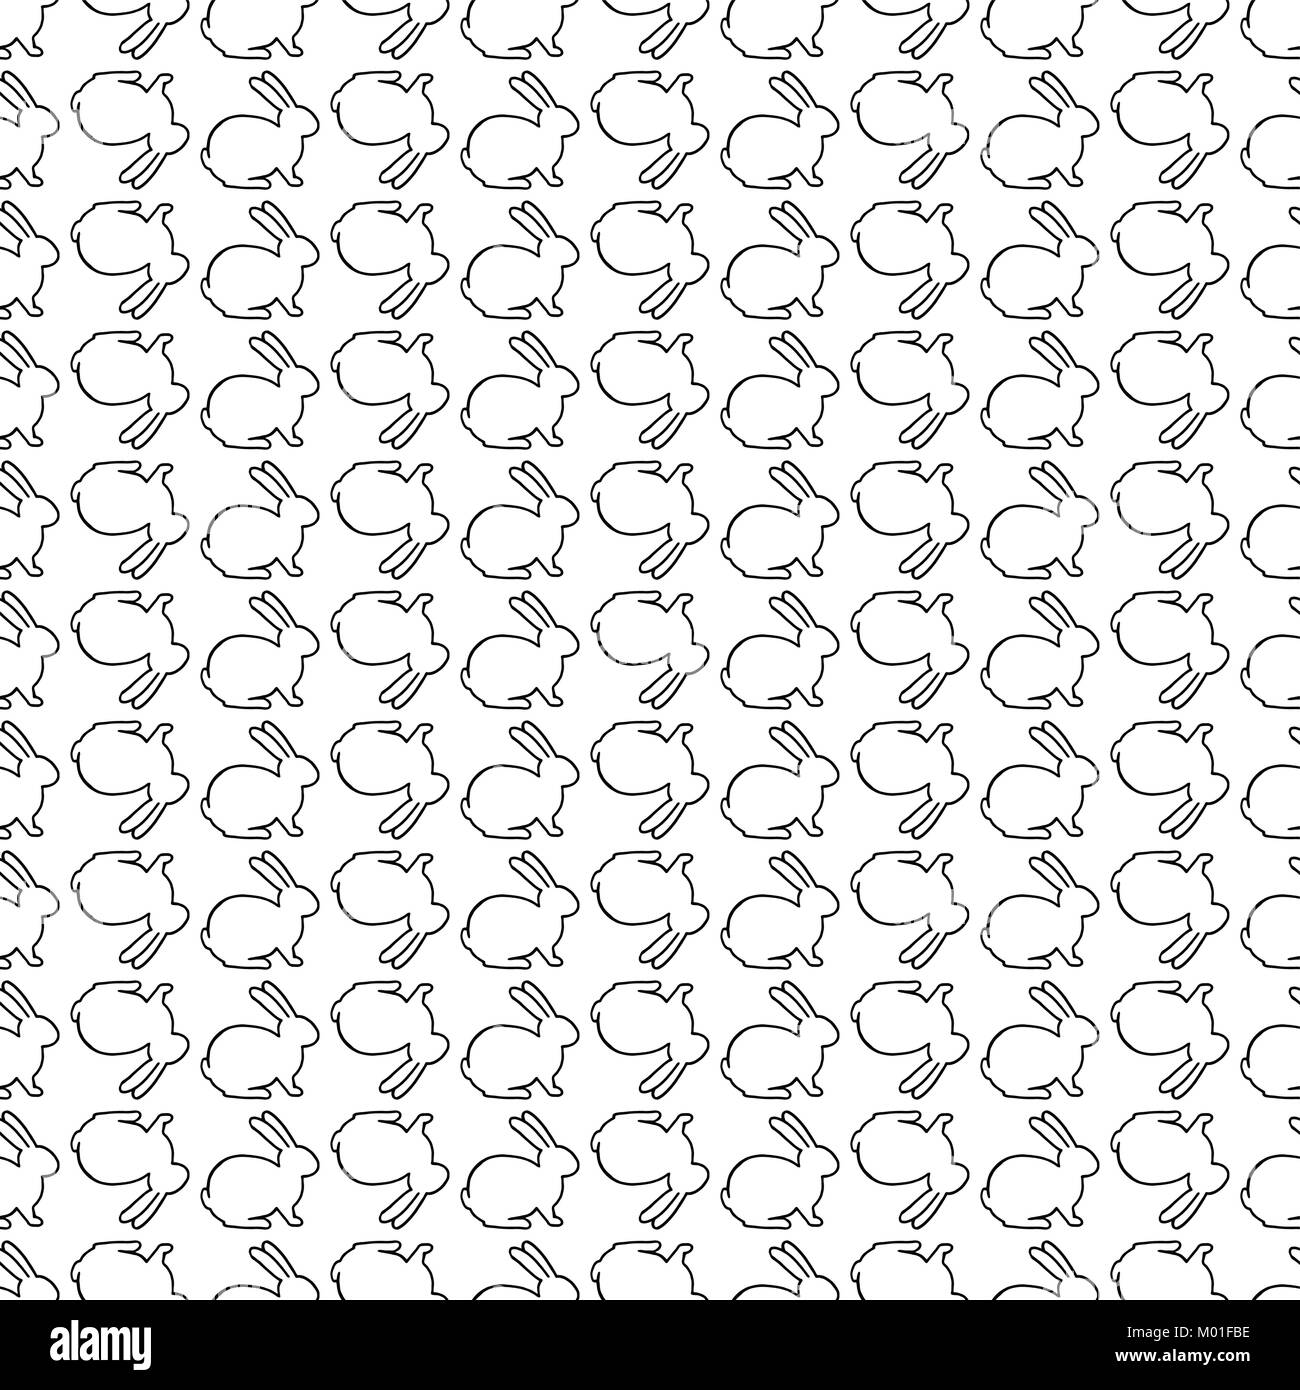 Bunny pattern Black and White Stock Photos & Images - Alamy